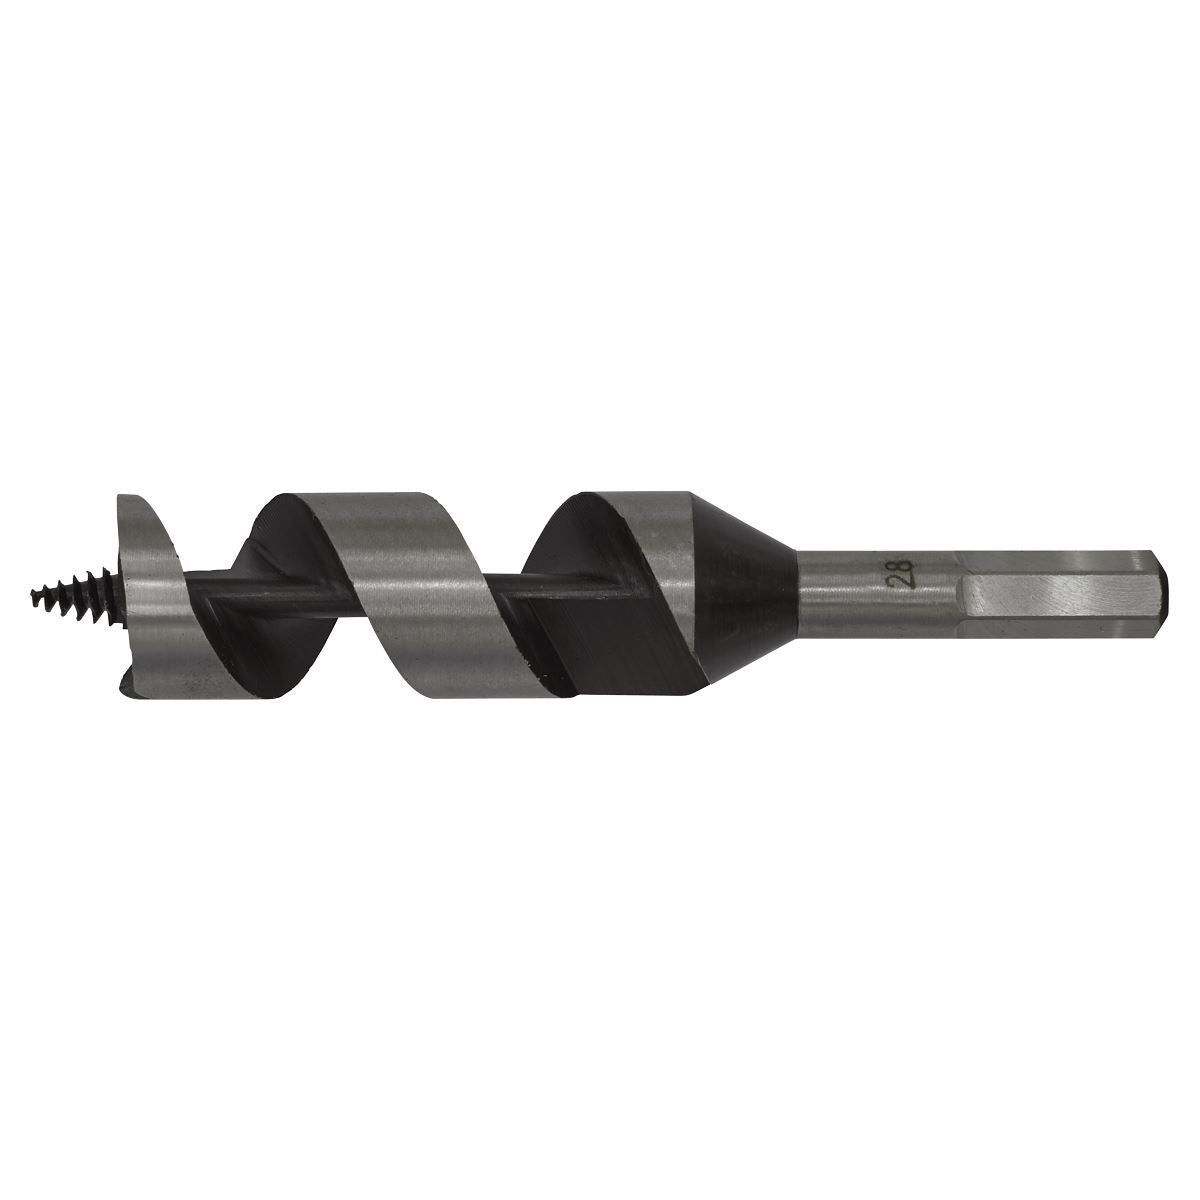 Worksafe by Sealey Auger Wood Drill Bit 28mm x 155mm